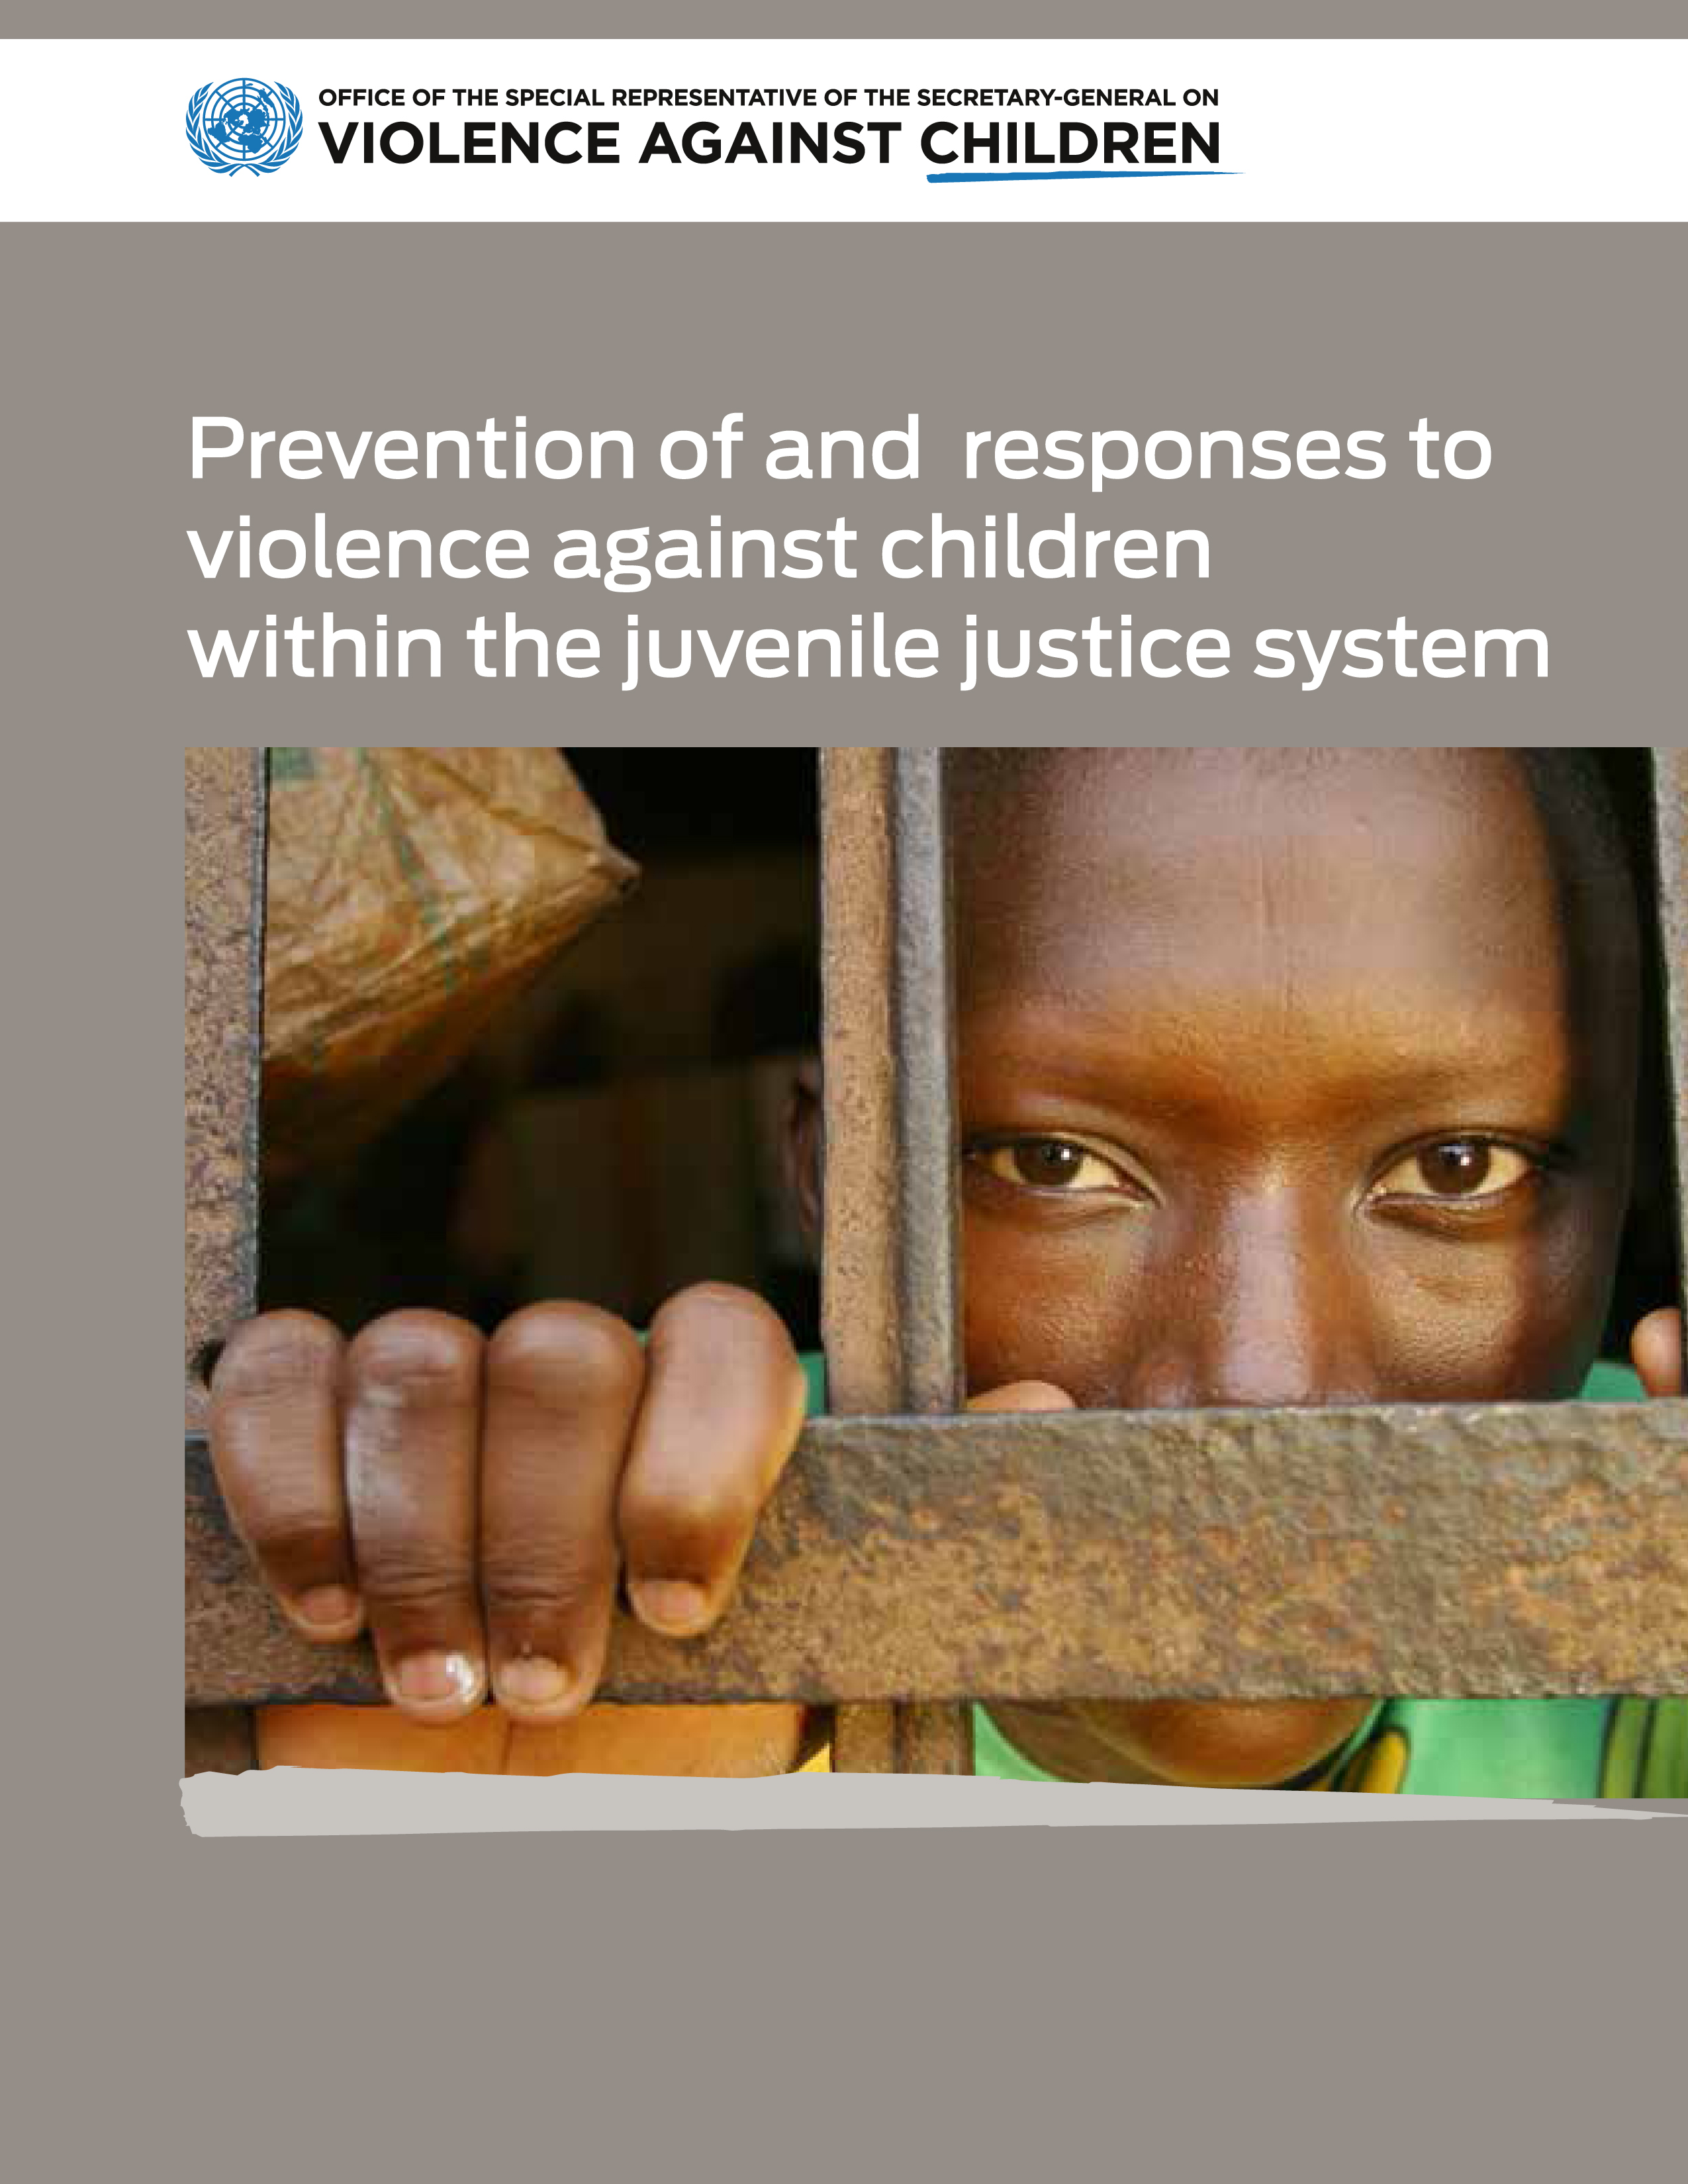 image of Systemic factors that contribute to violence against children